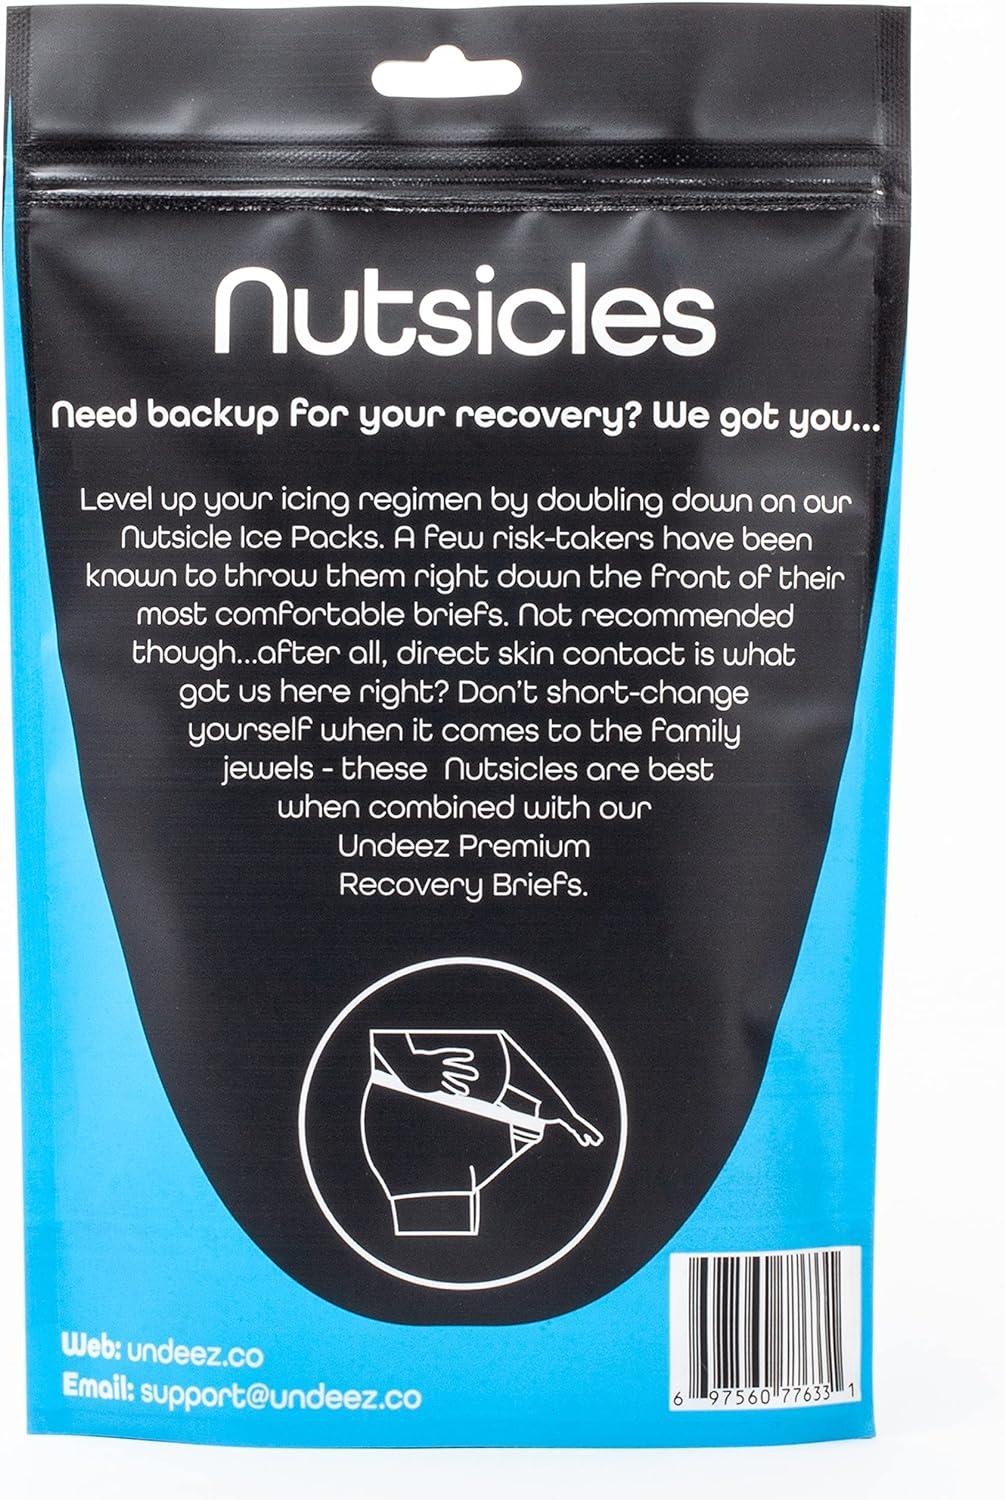 Vasectomy (2) Ice Pack Underwear Inserts - Nutsicle Custom Fit Vasectomy  Ice Packs for Pain Relief During Vasectomy Recovery - Vasectomy Gift for Men